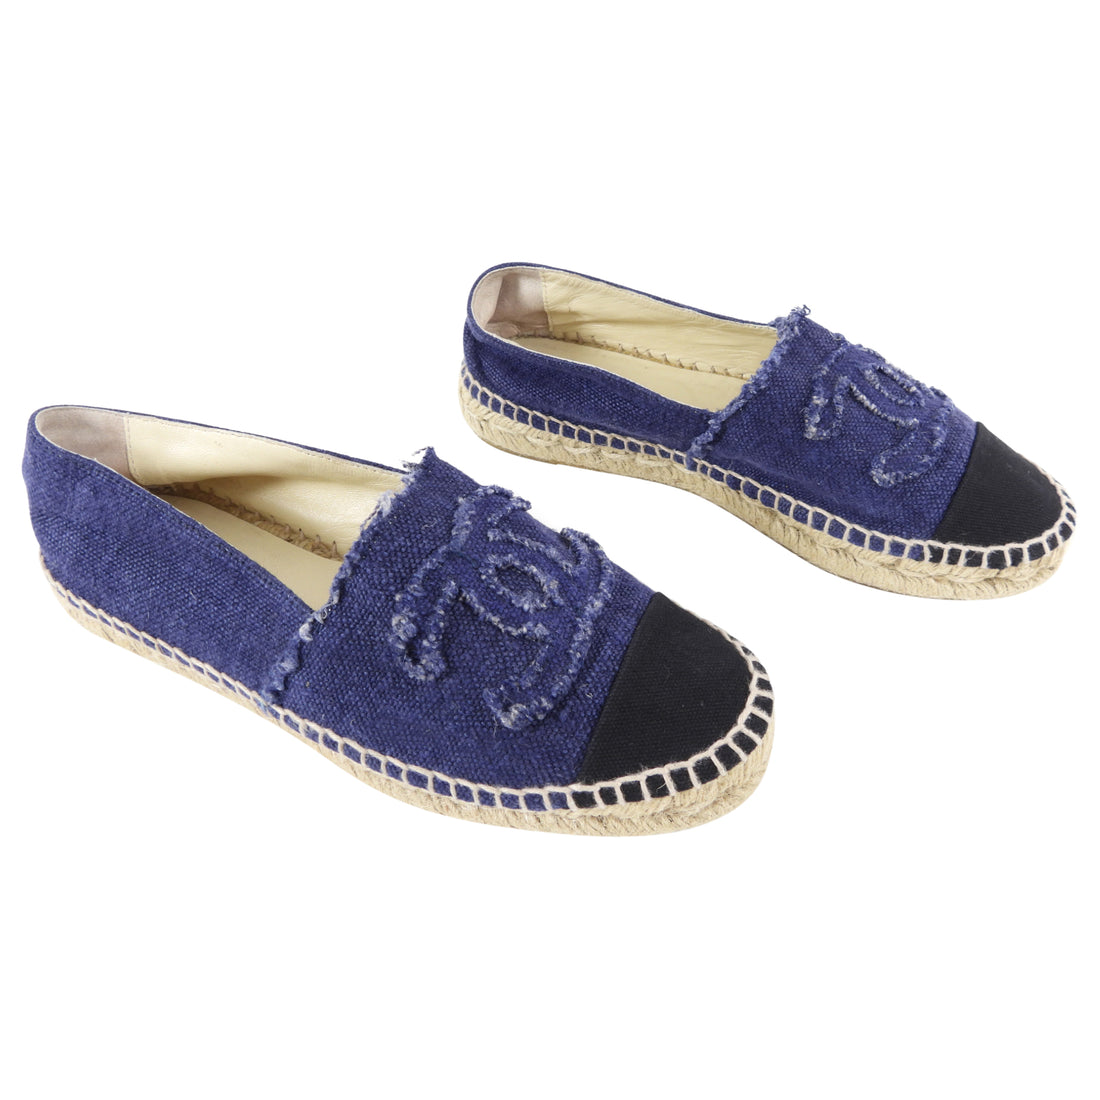 Chanel Blue Tweed and Silver CC Cap Toe Espadrilles Flats Size 37 Chanel